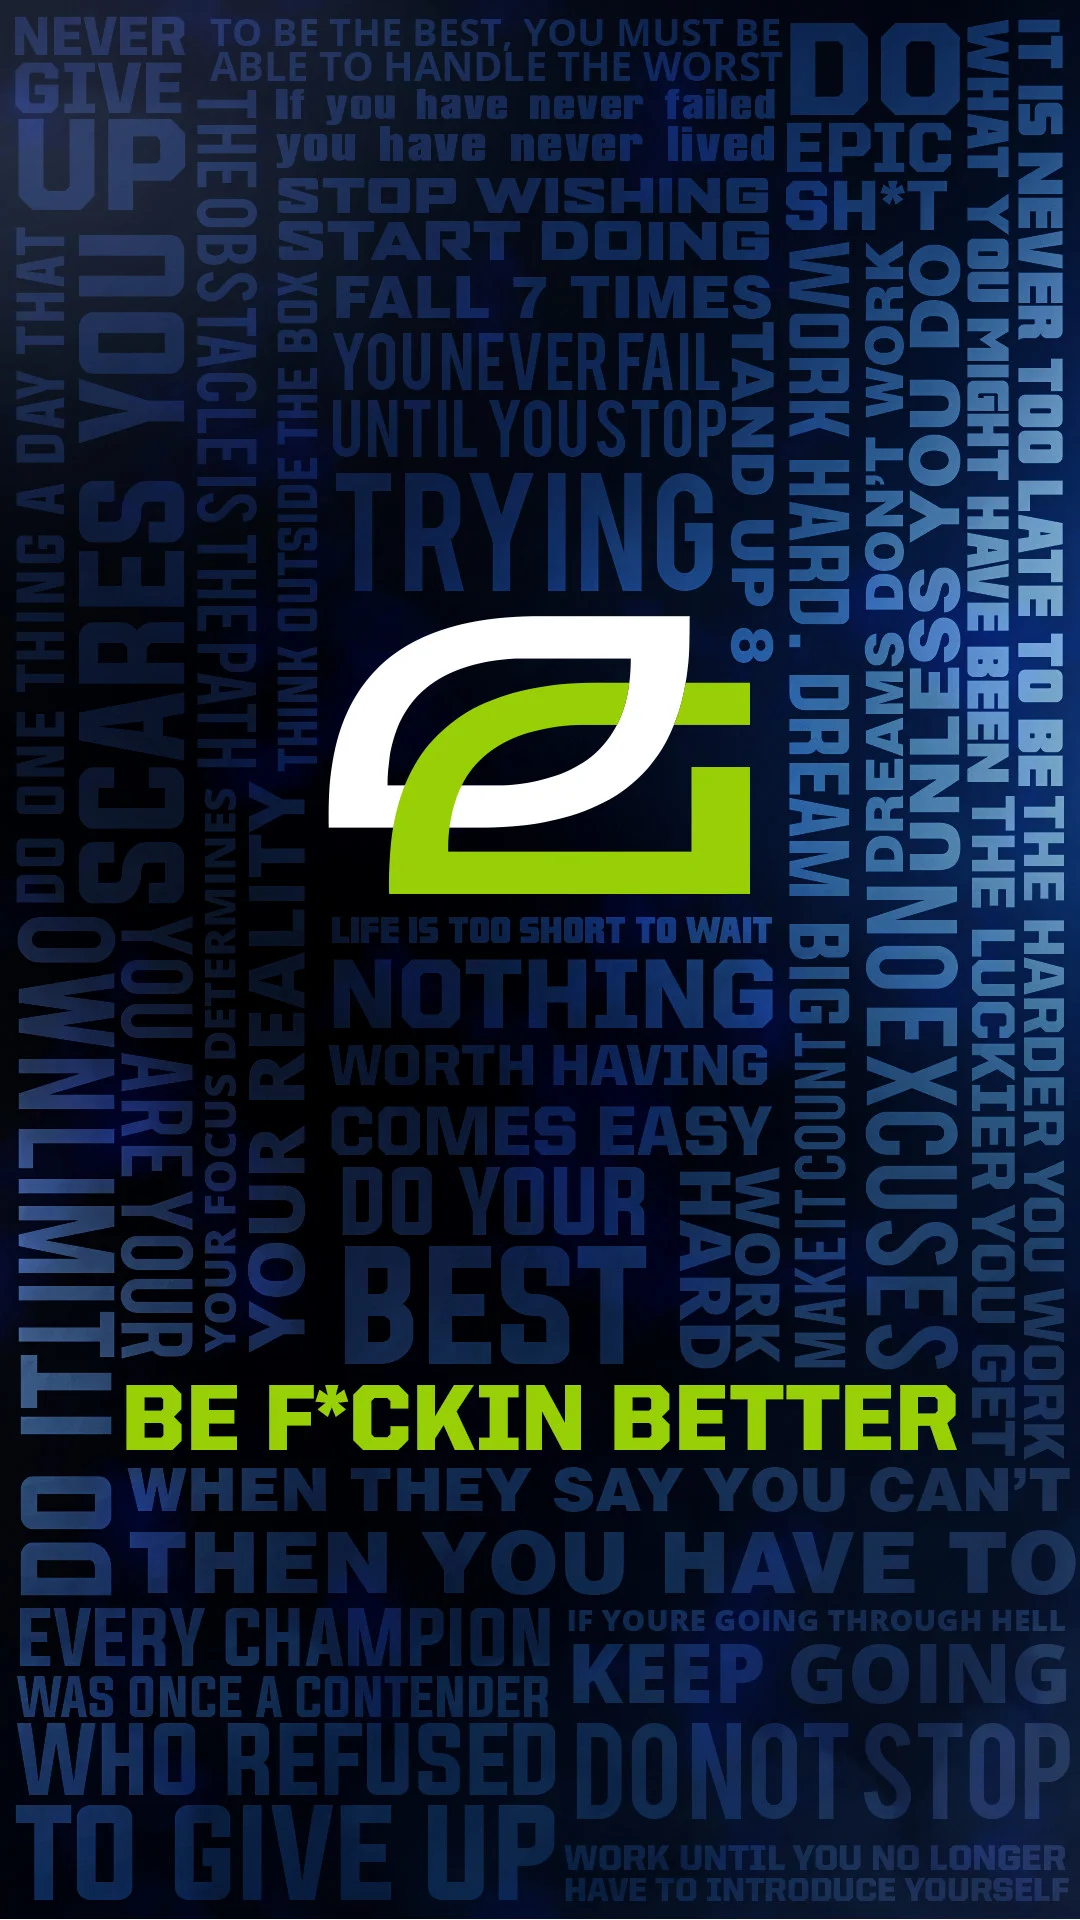 OpTic Xobe on Twitter: "Phone wallpaper for @OpTicGaming! Main quote by the  one and only @OpTic_Crimsix Hope you guys like it!